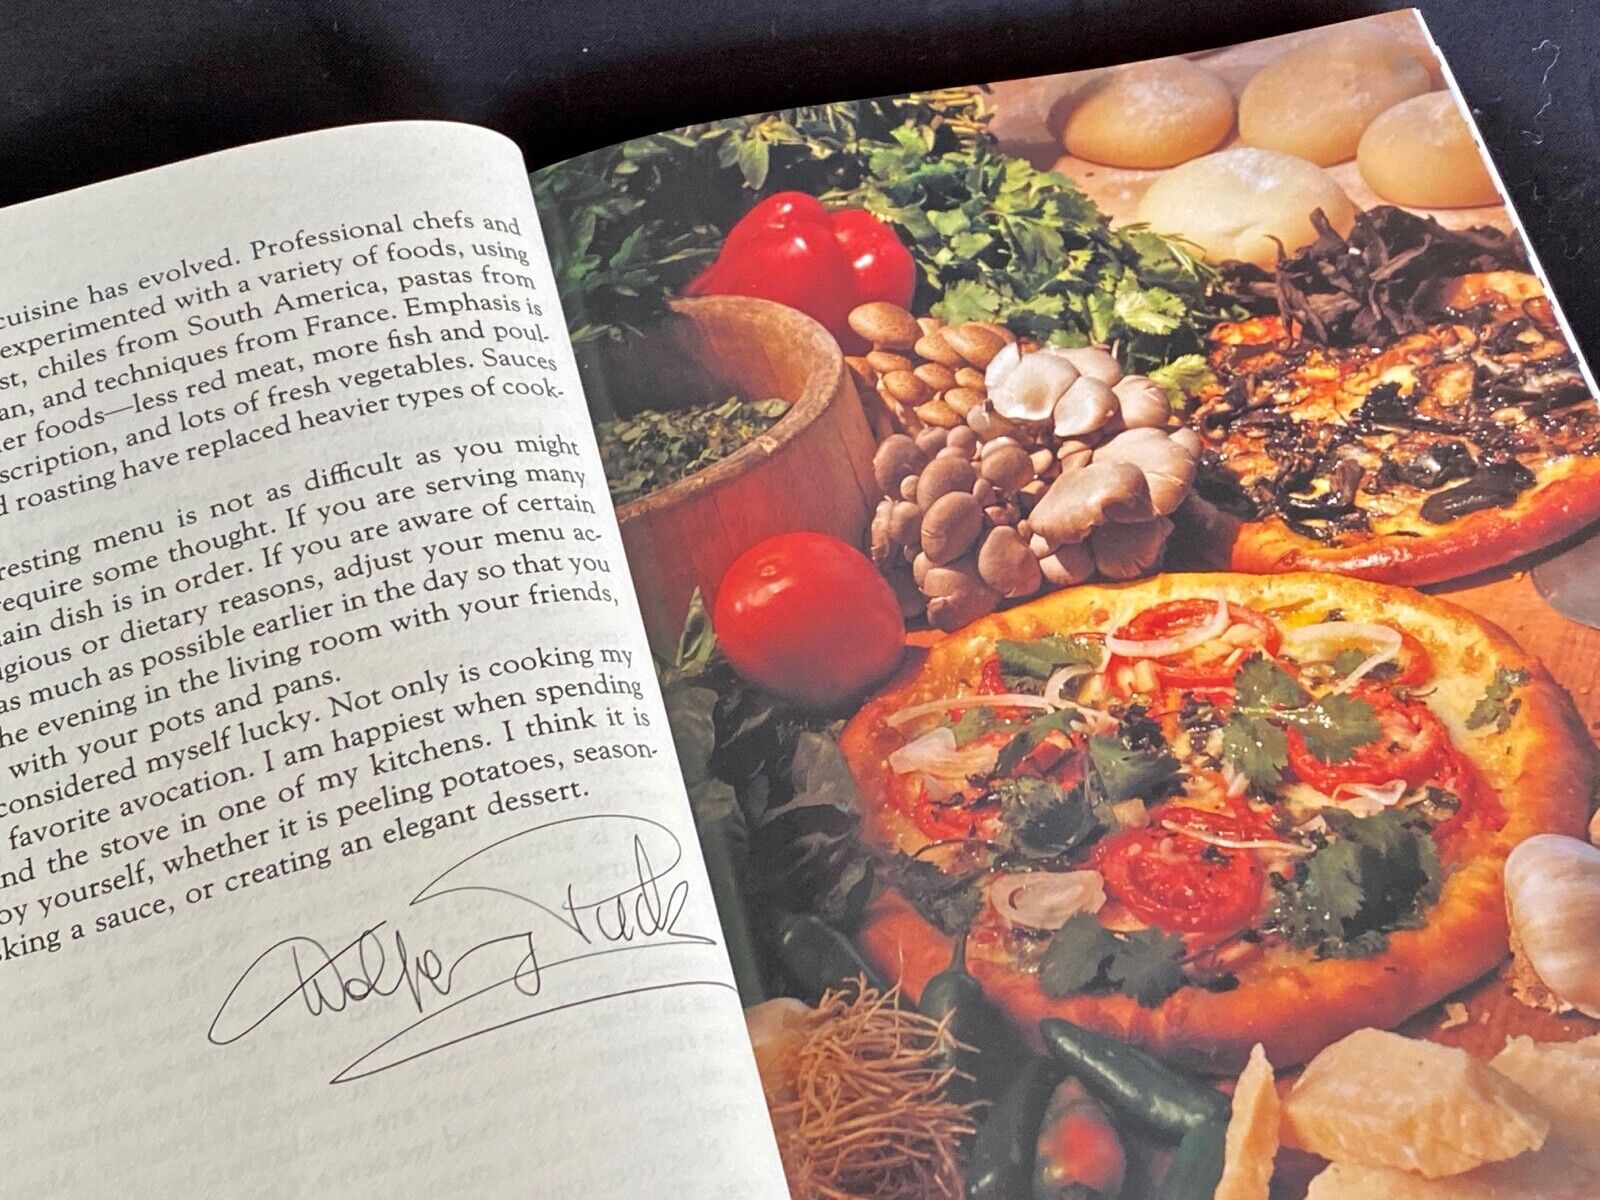 WOLFGANG PUCK SIGNED "SPAGO" APRON + "ADVENTURES IN THE KITCHEN" BOOK Без бренда - фотография #6